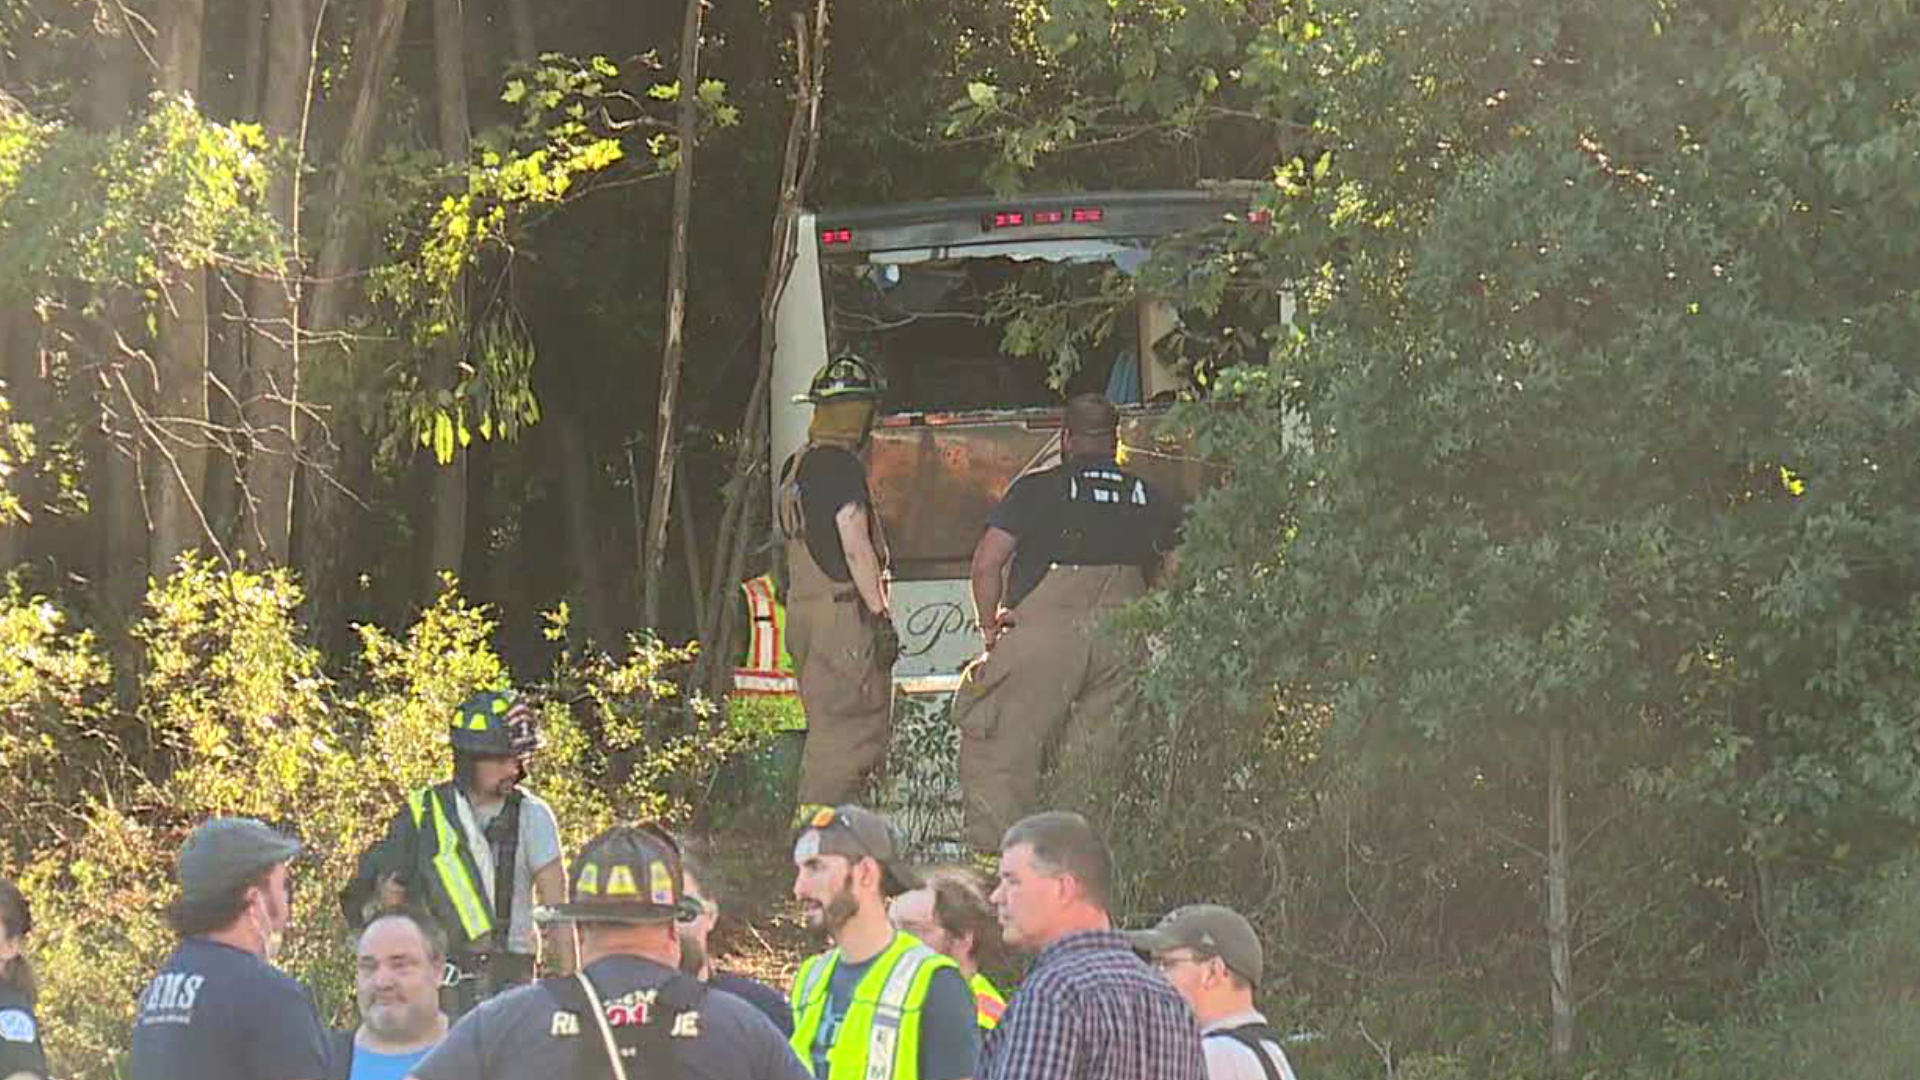 Victims are still in hospitals, some with serious injuries after a church group's charter bus crashed in Schuylkill County.